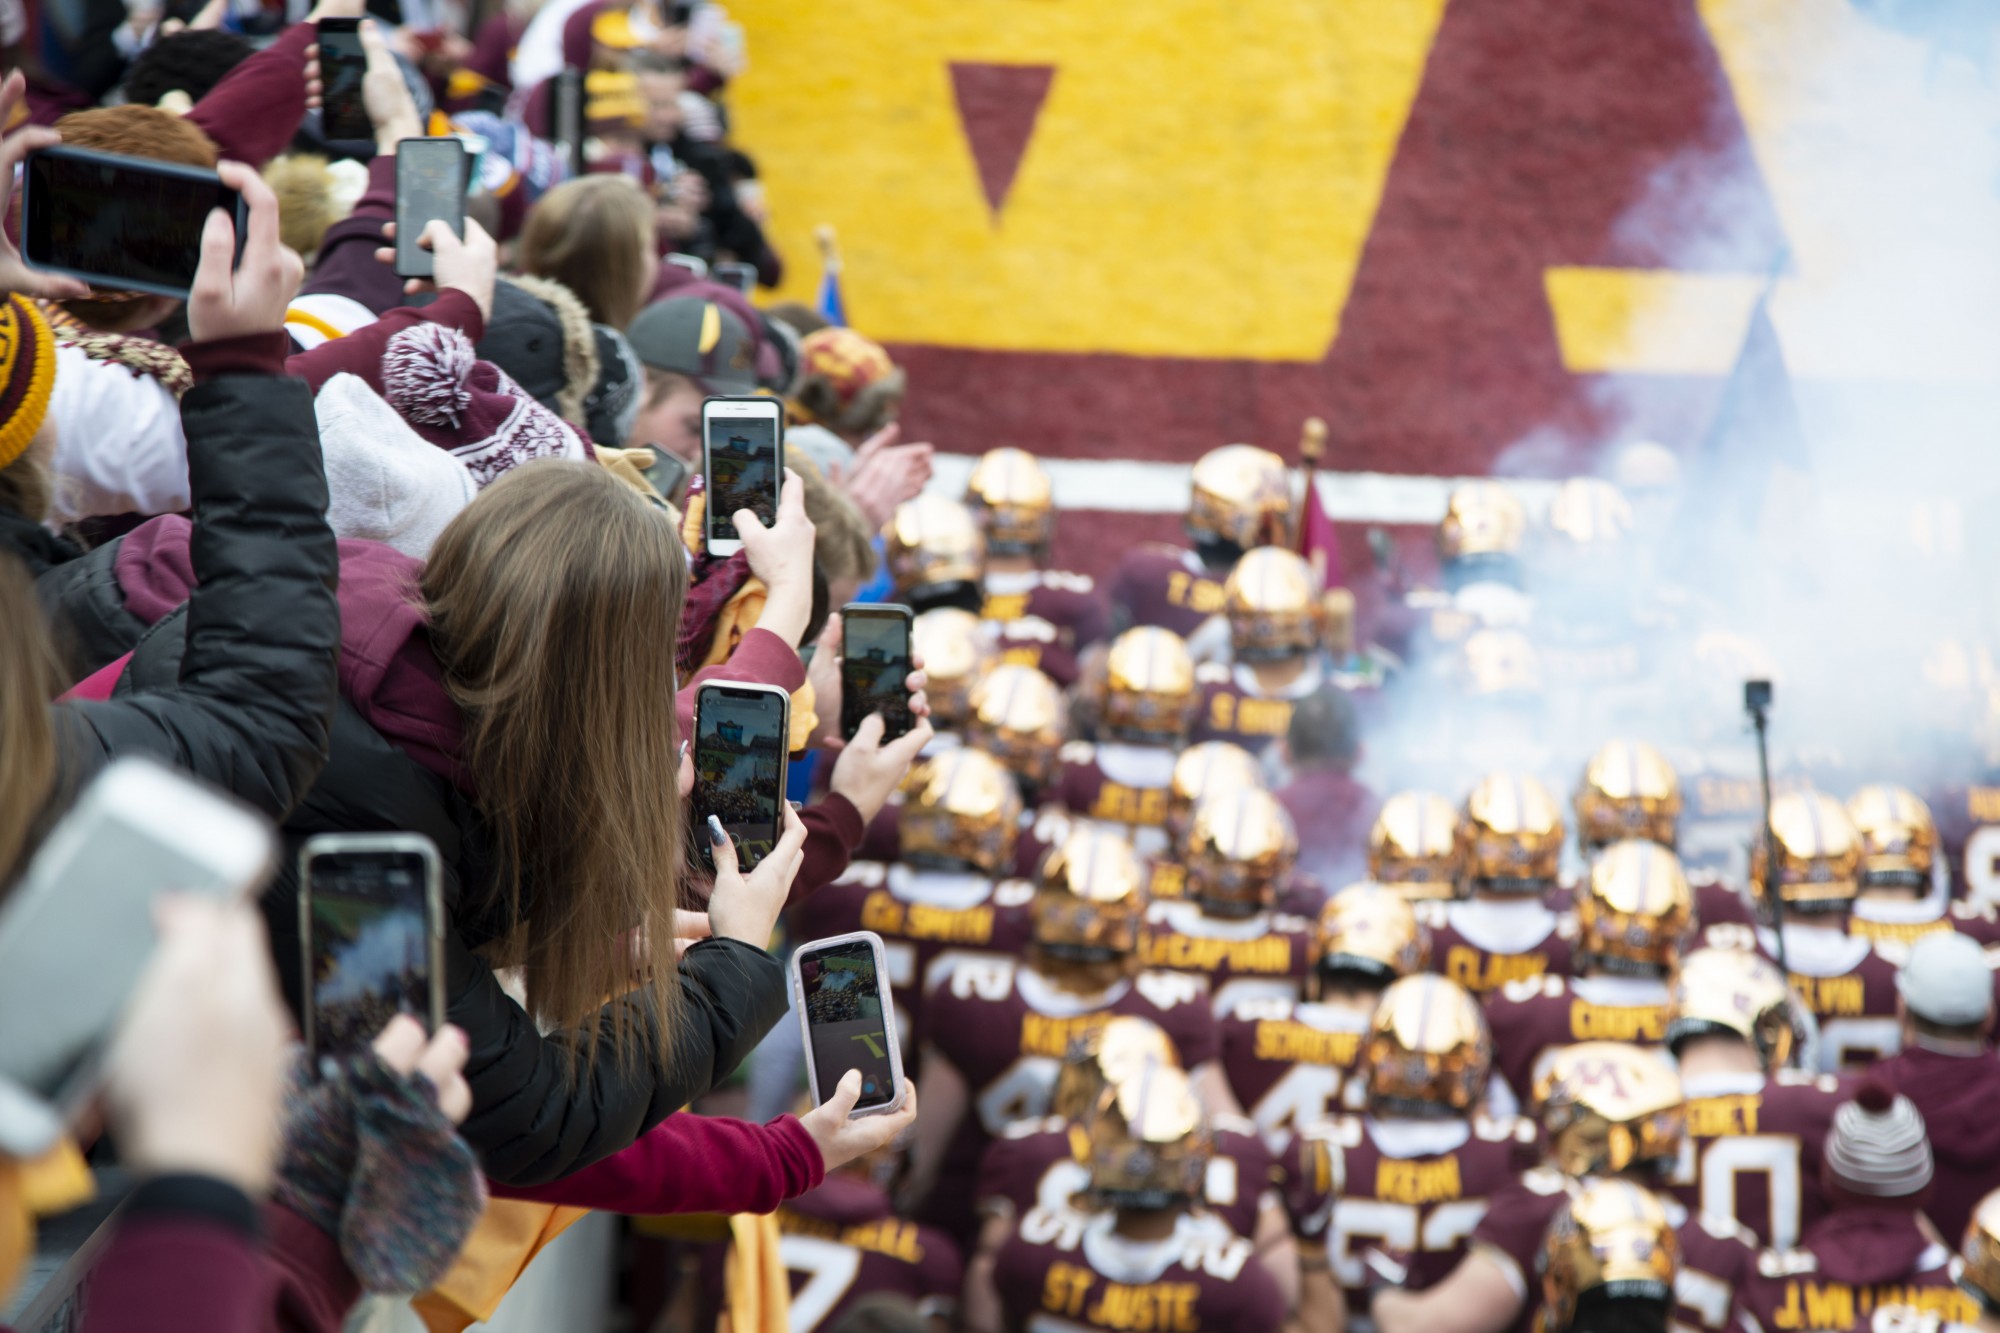 Fans cheer for the Gophers as they enter the field at TCF Bank Stadium on Saturday, Nov. 9. The Gophers defeated Penn State 31-26 to bring their record to 9-0. A first since 1904. 